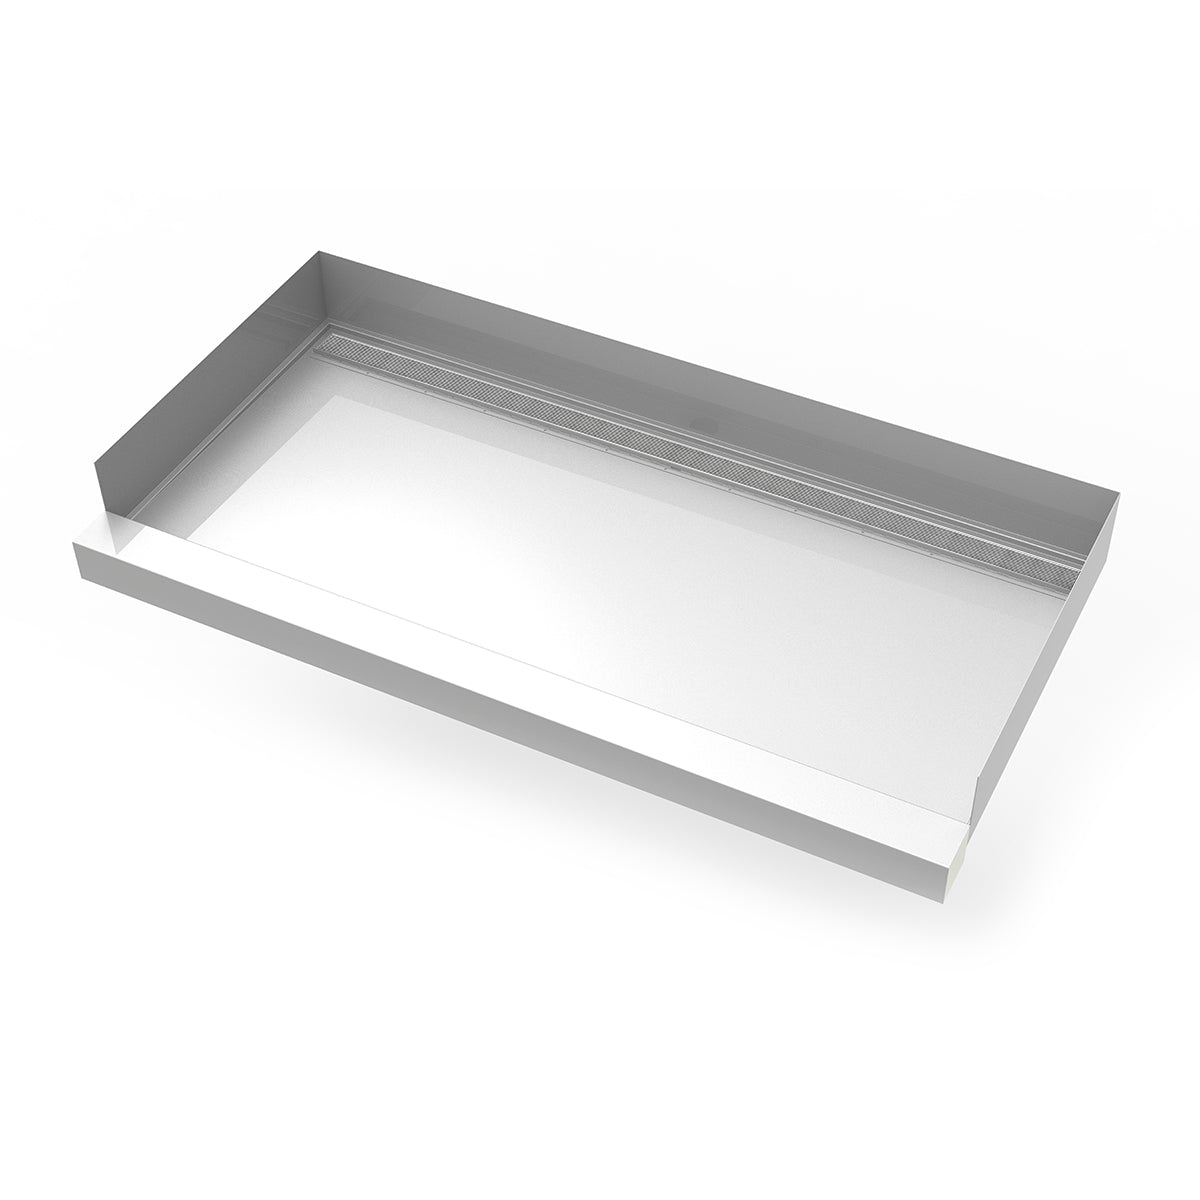 Infinity Drain 30"x 60" Stainless Steel Shower Base with Back Wall Wedge Wire Linear Drain location